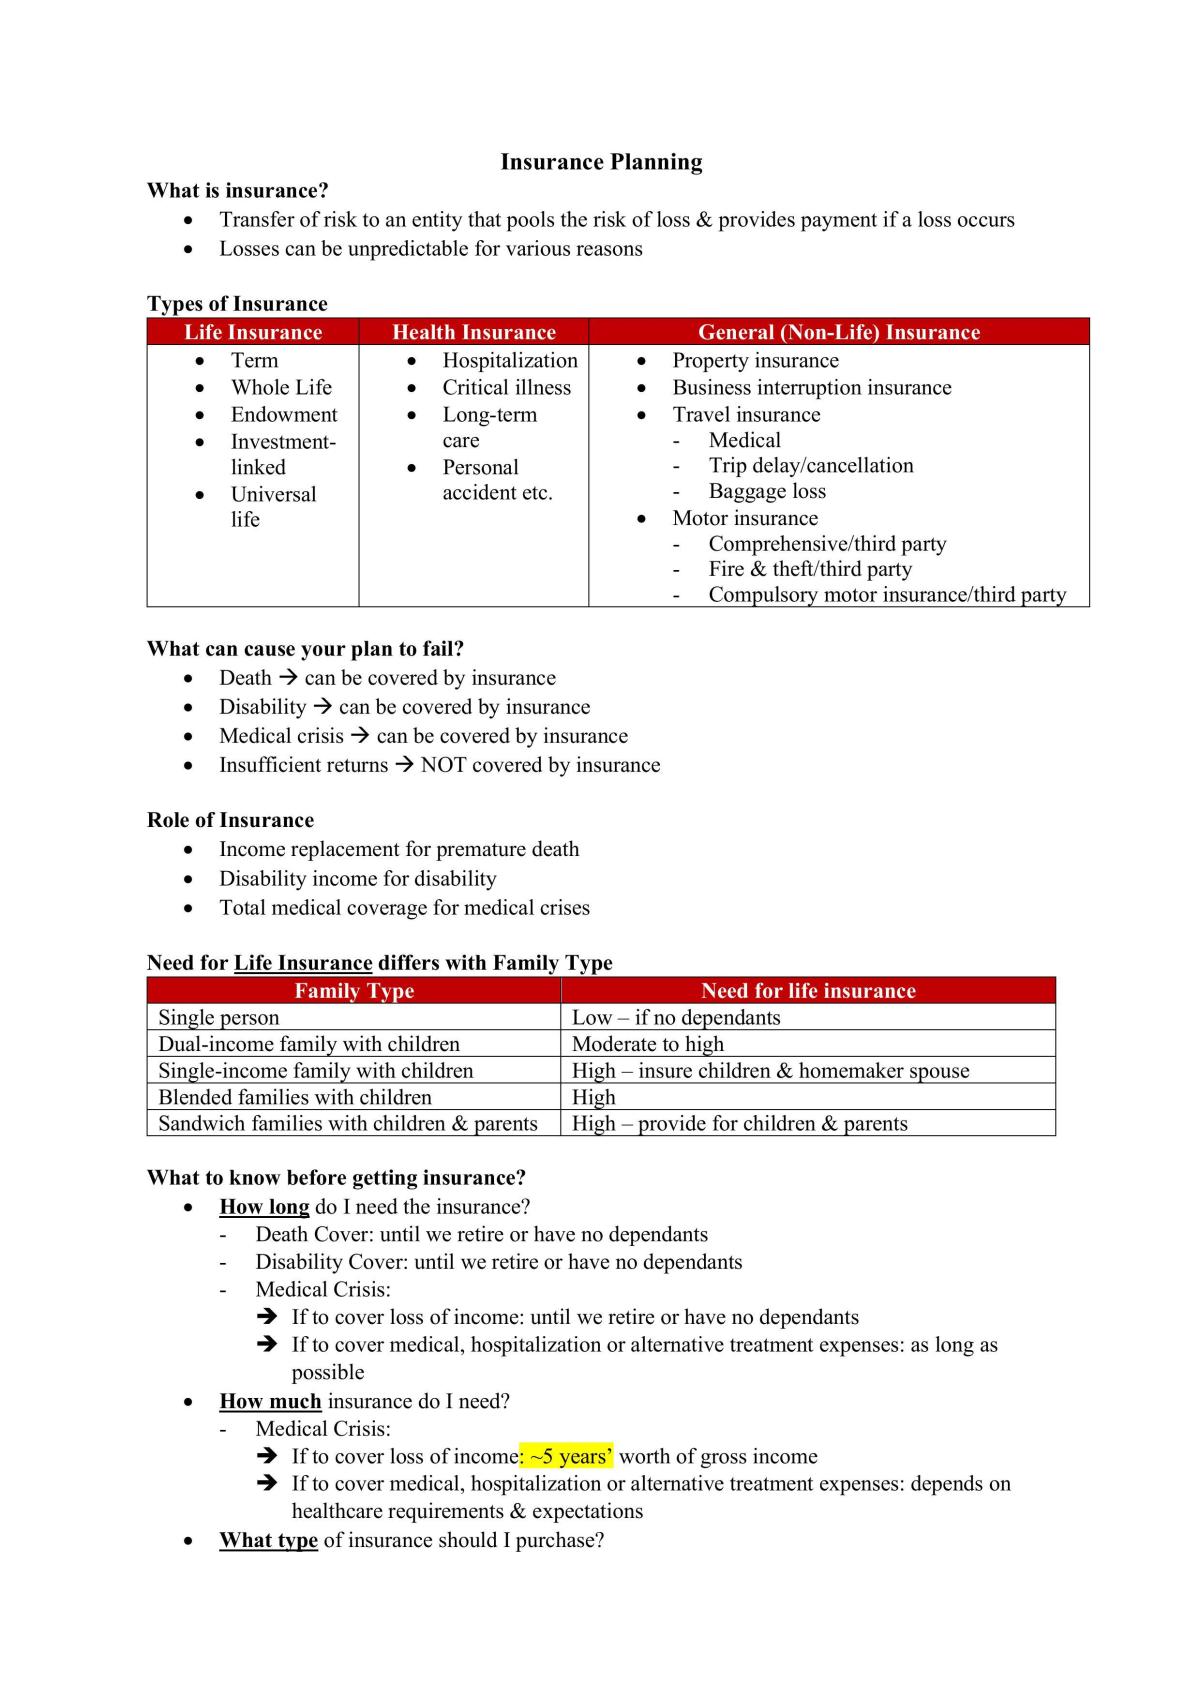 Insurance Planning - Page 1